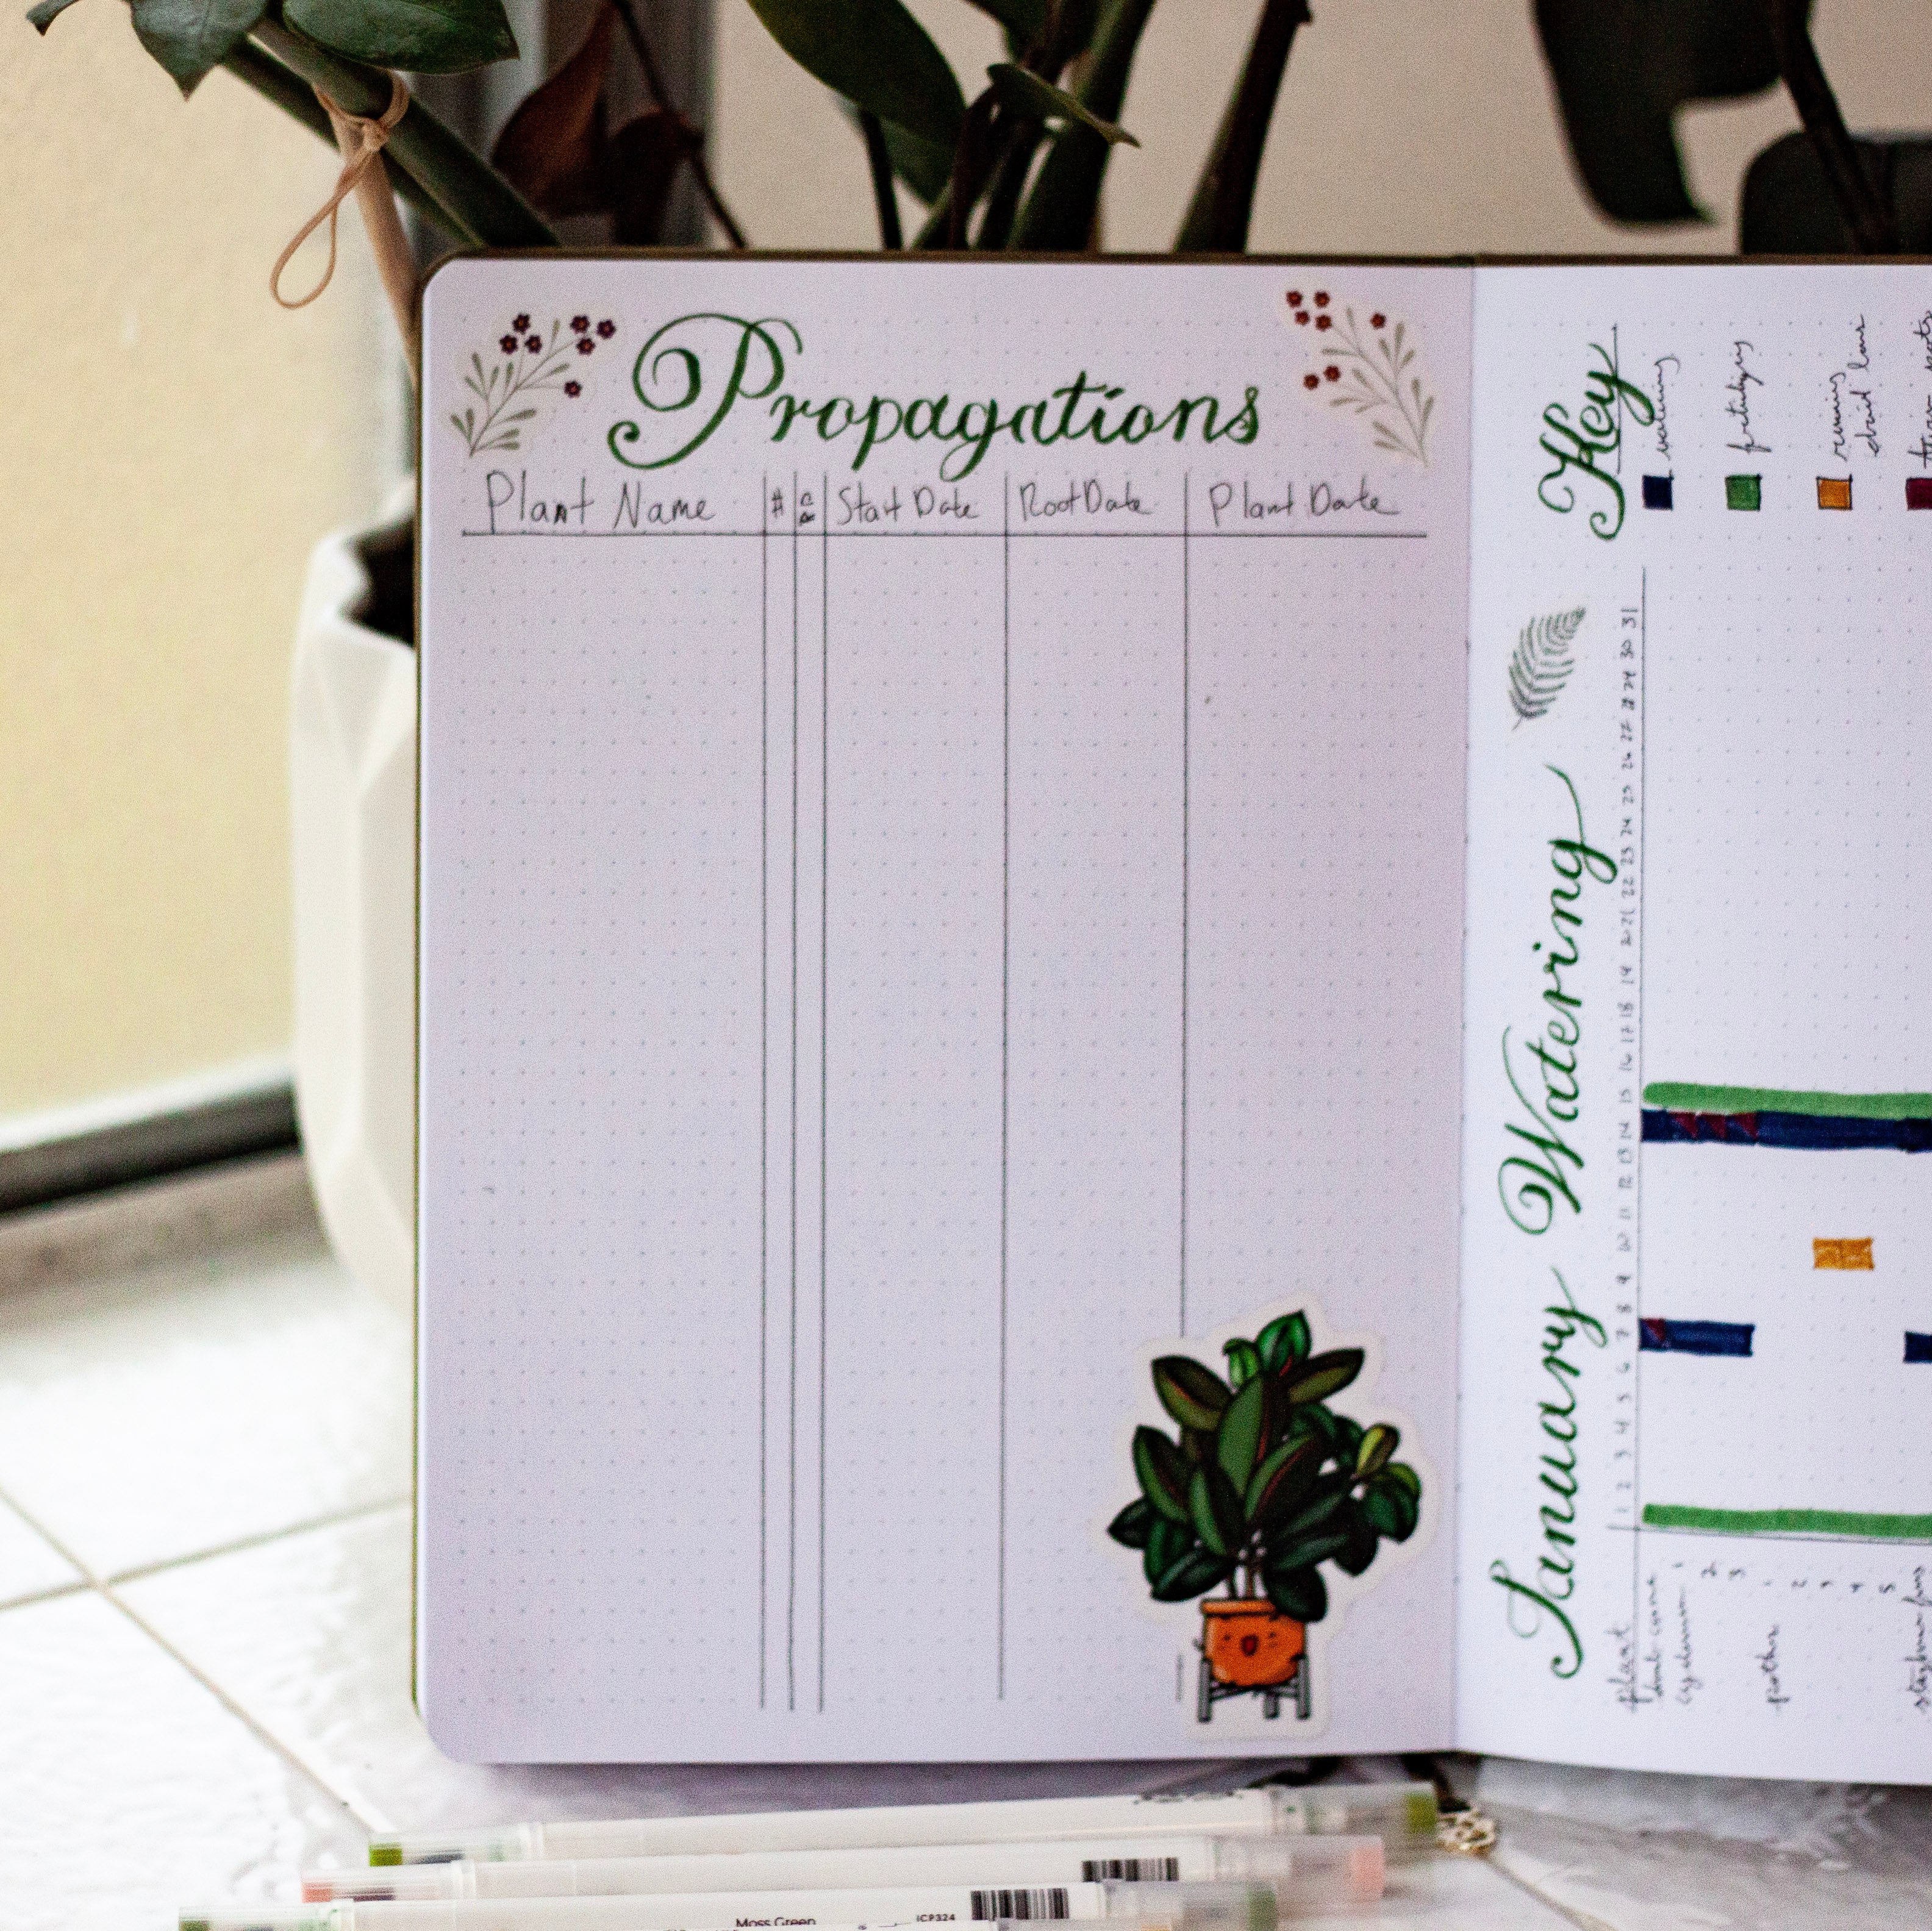 Plant Care Bullet Journal Trackers You Need To Your Alive | Archer and